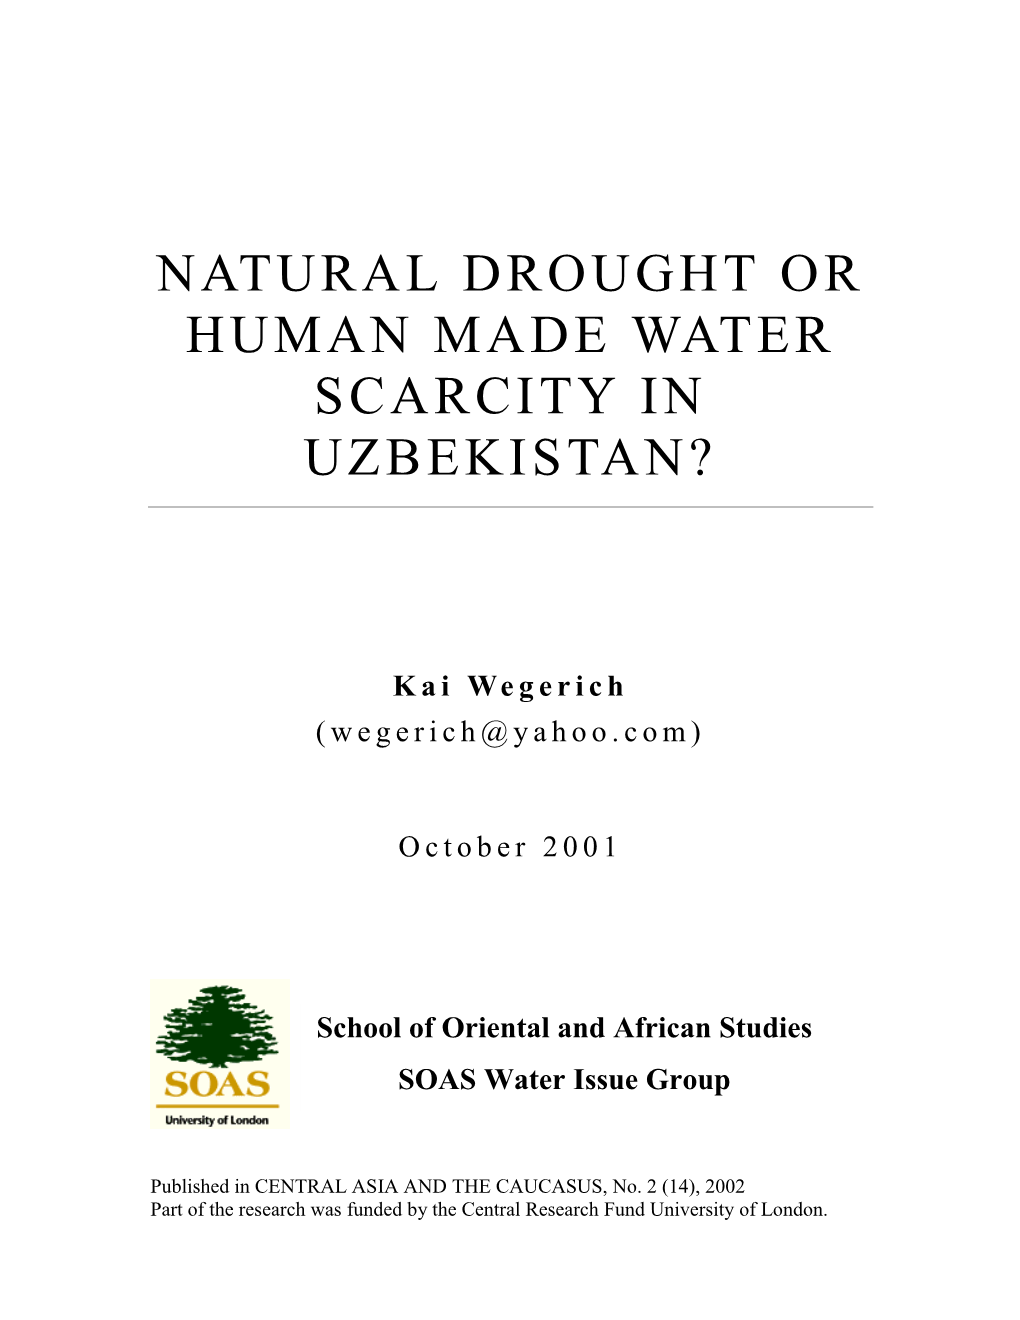 Natural Drought Or Human Made Water Scarcity in Uzbekistan?